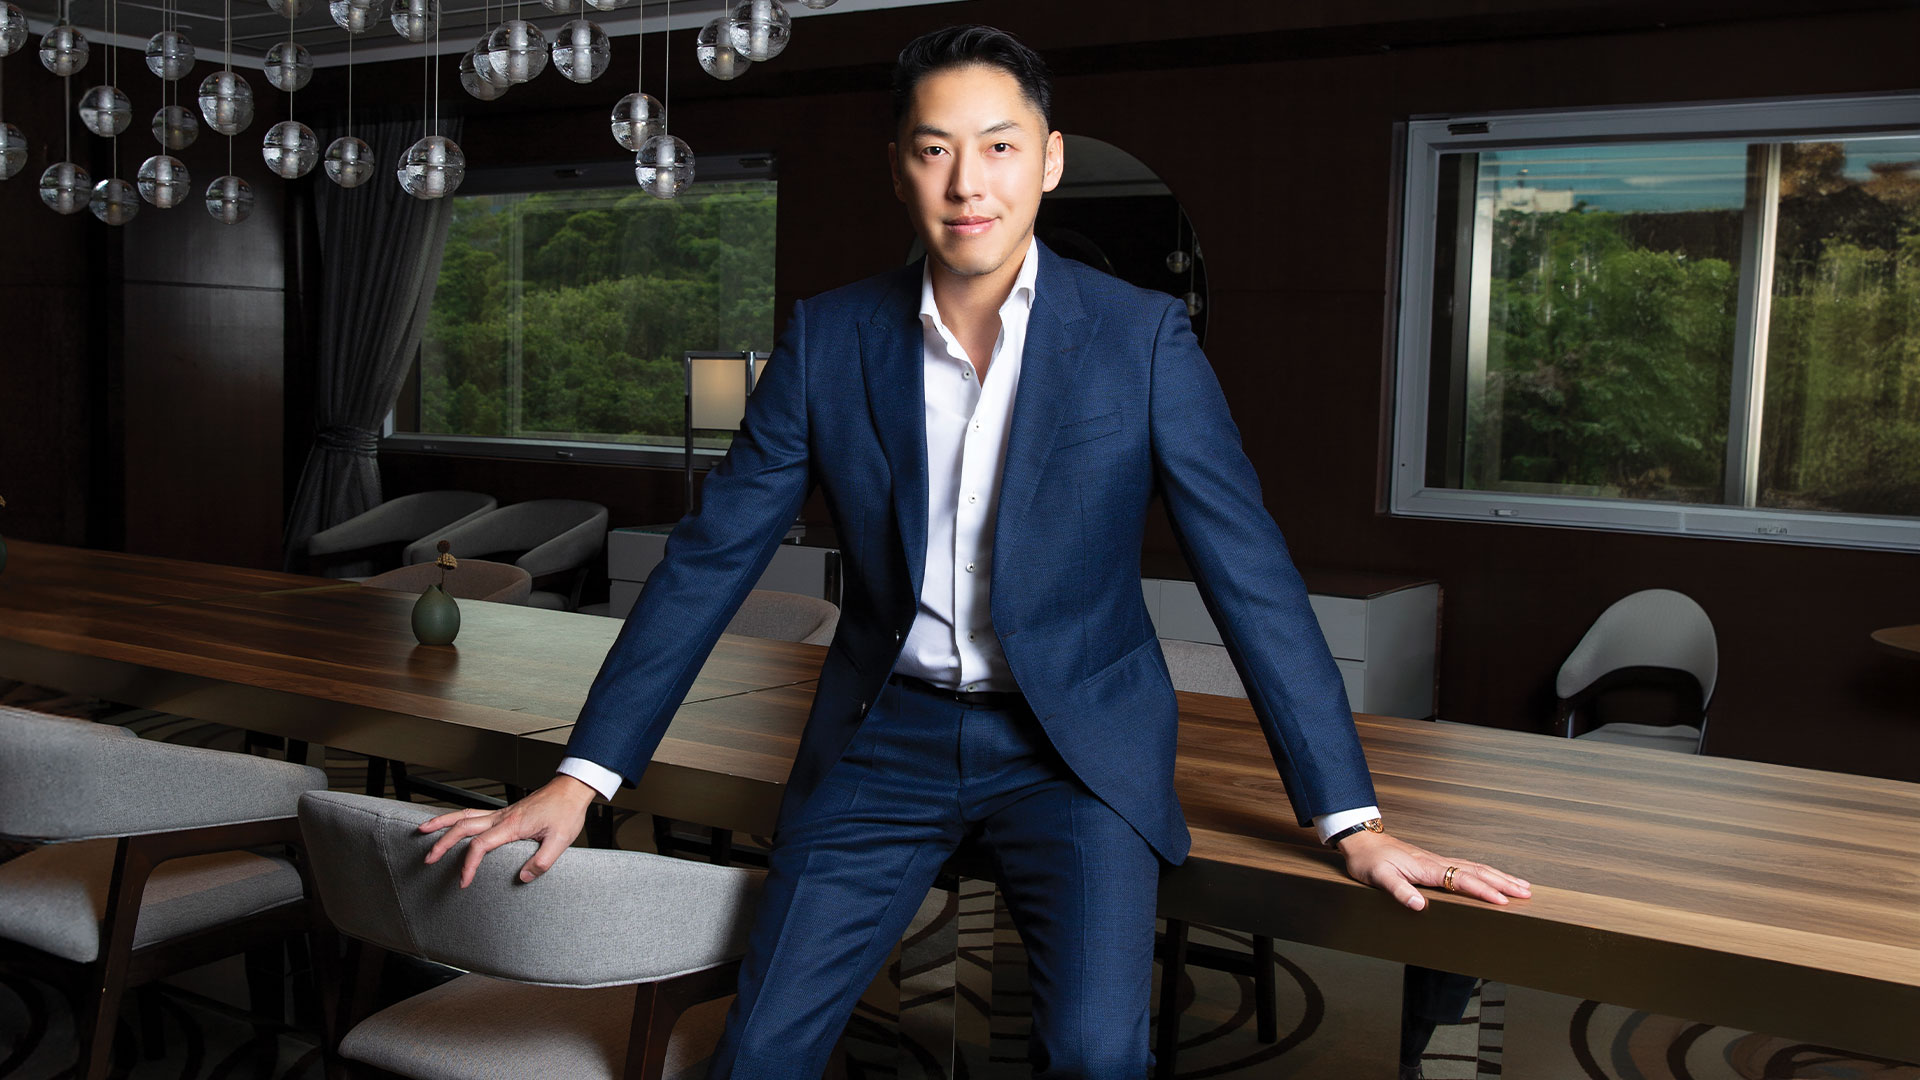 Turbo Charged: Dynamism is a family trait for young entrepreneur Ethan Ung, builder of an innovative branded-merchandise empire